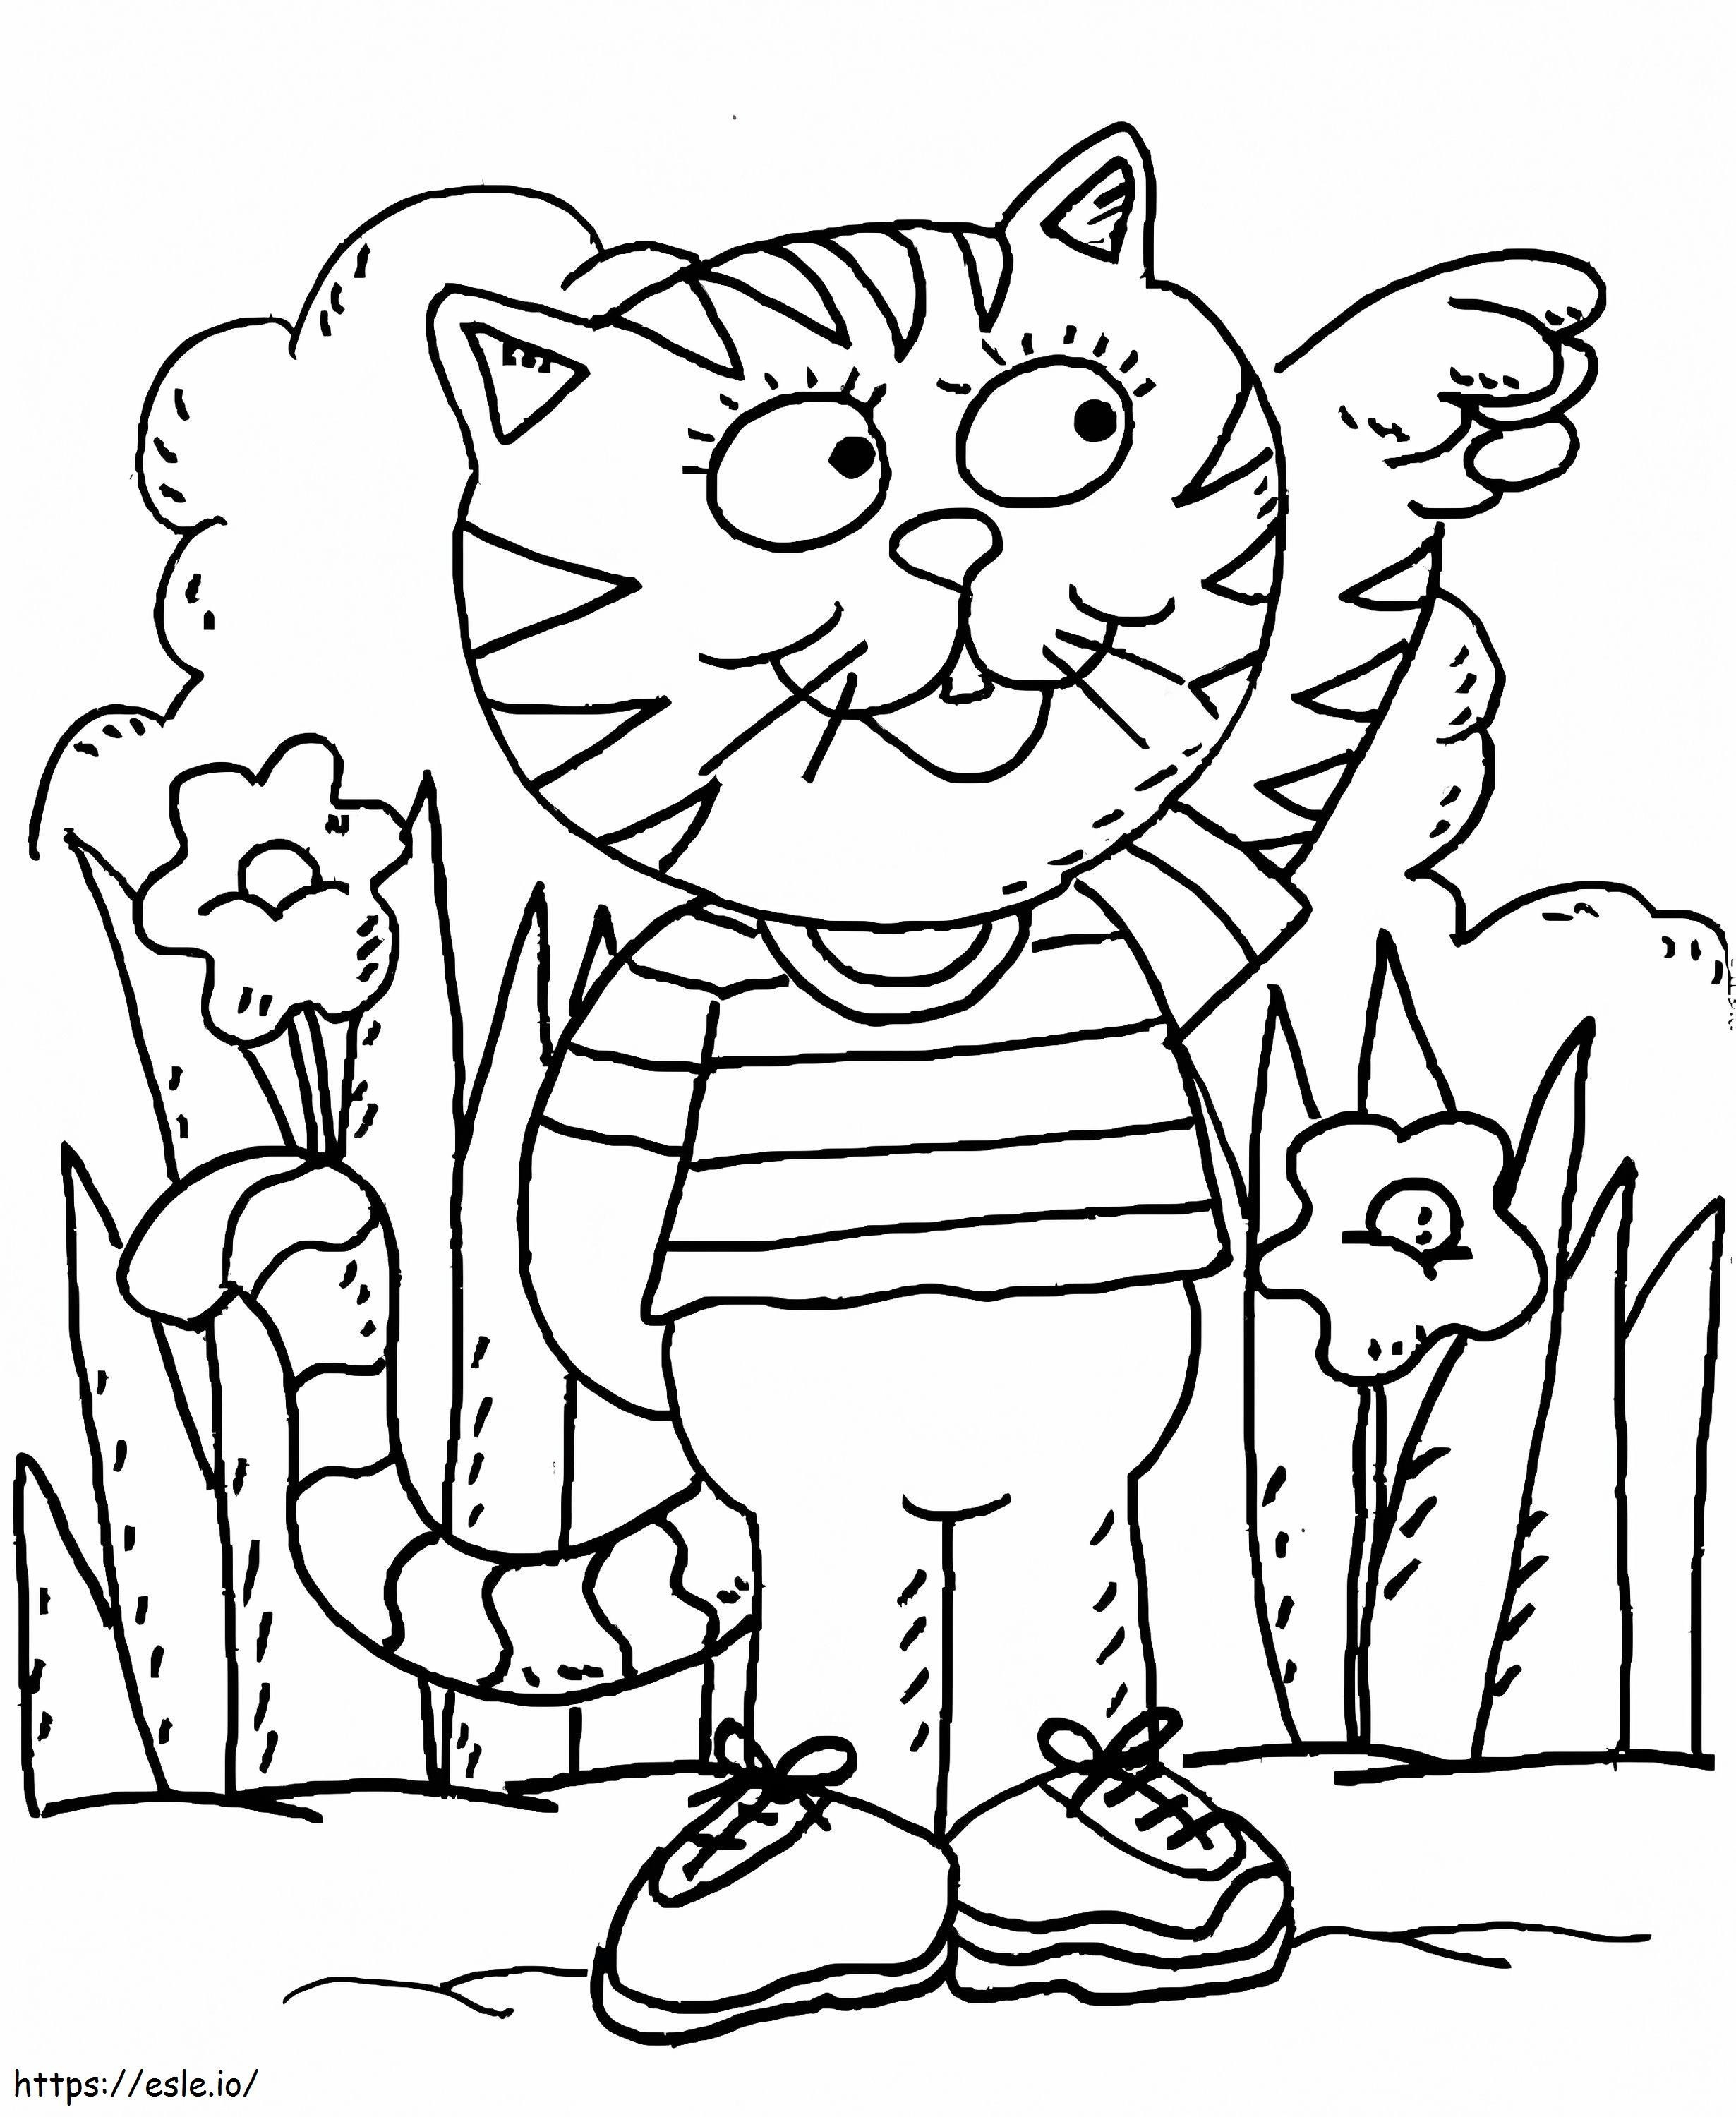 Animated Cat coloring page